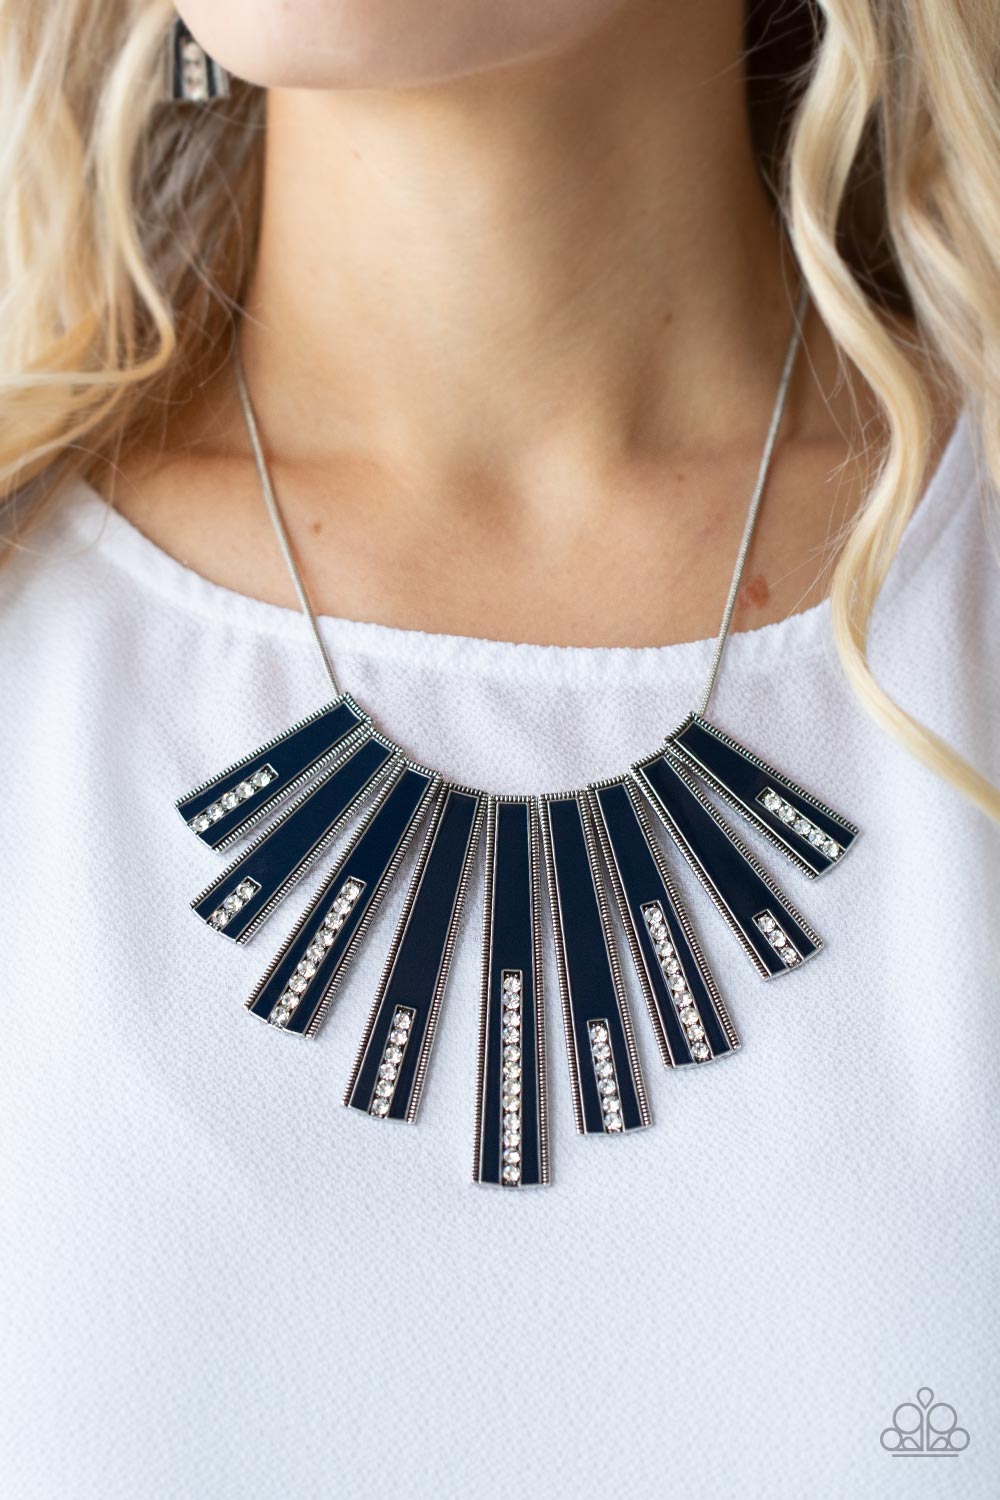 FAN-tastically Deco- Blue and Silver Necklace- Paparazzi Accessories